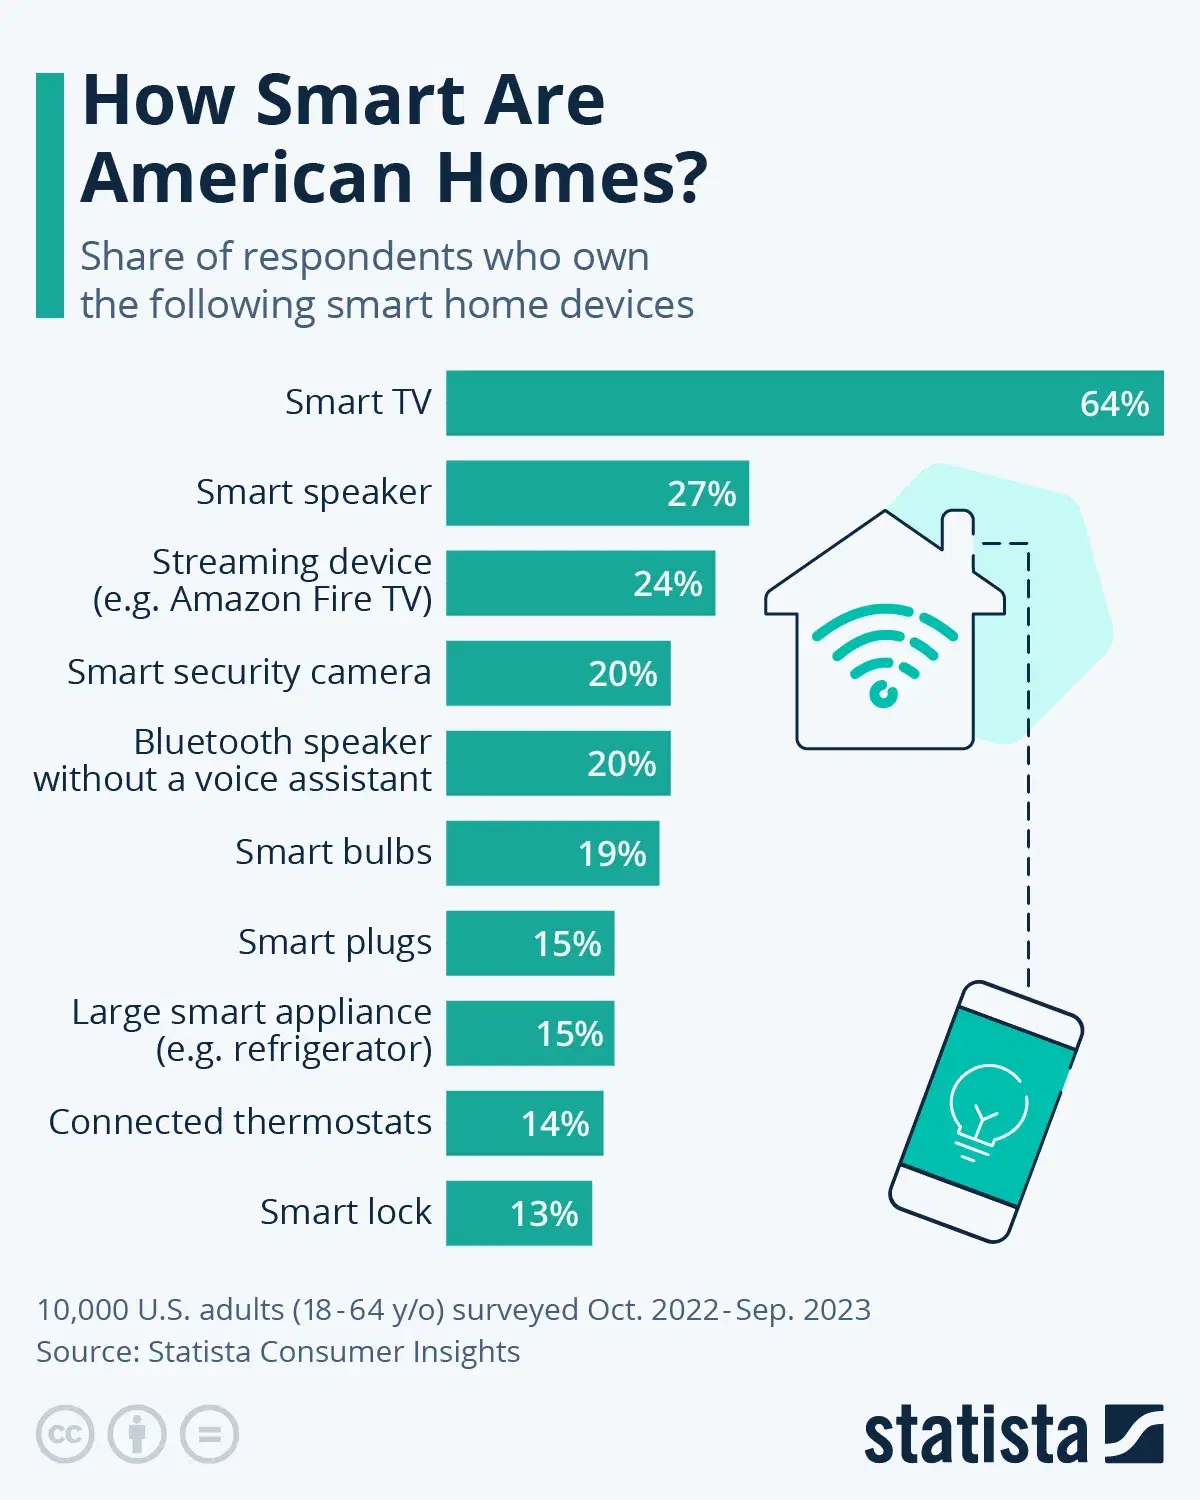 How Smart are American Homes?